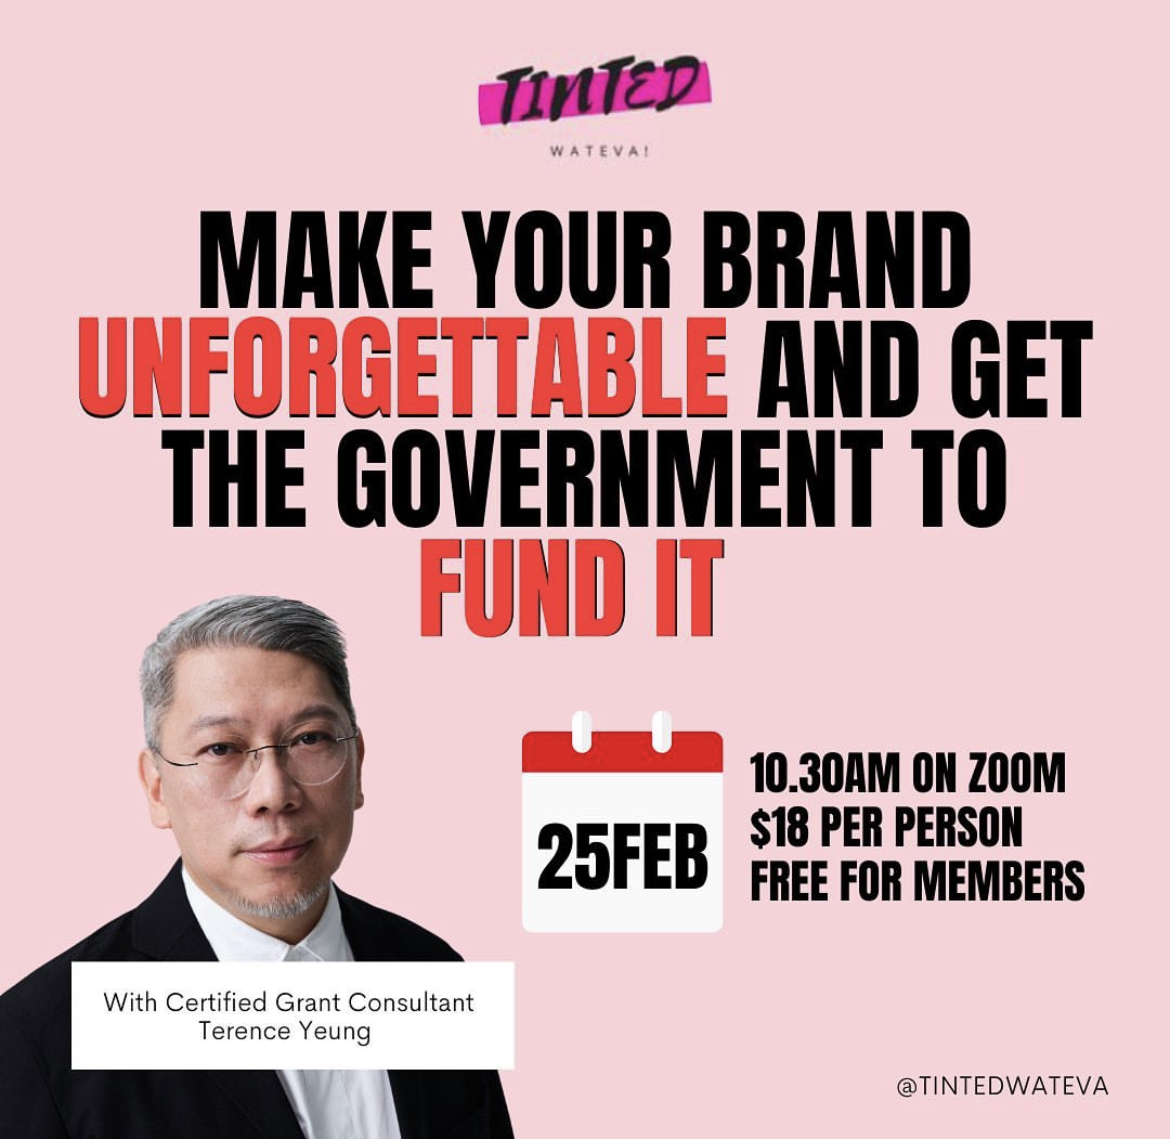 Make Your Brand Unforgettable and Get the Government to Fund It!